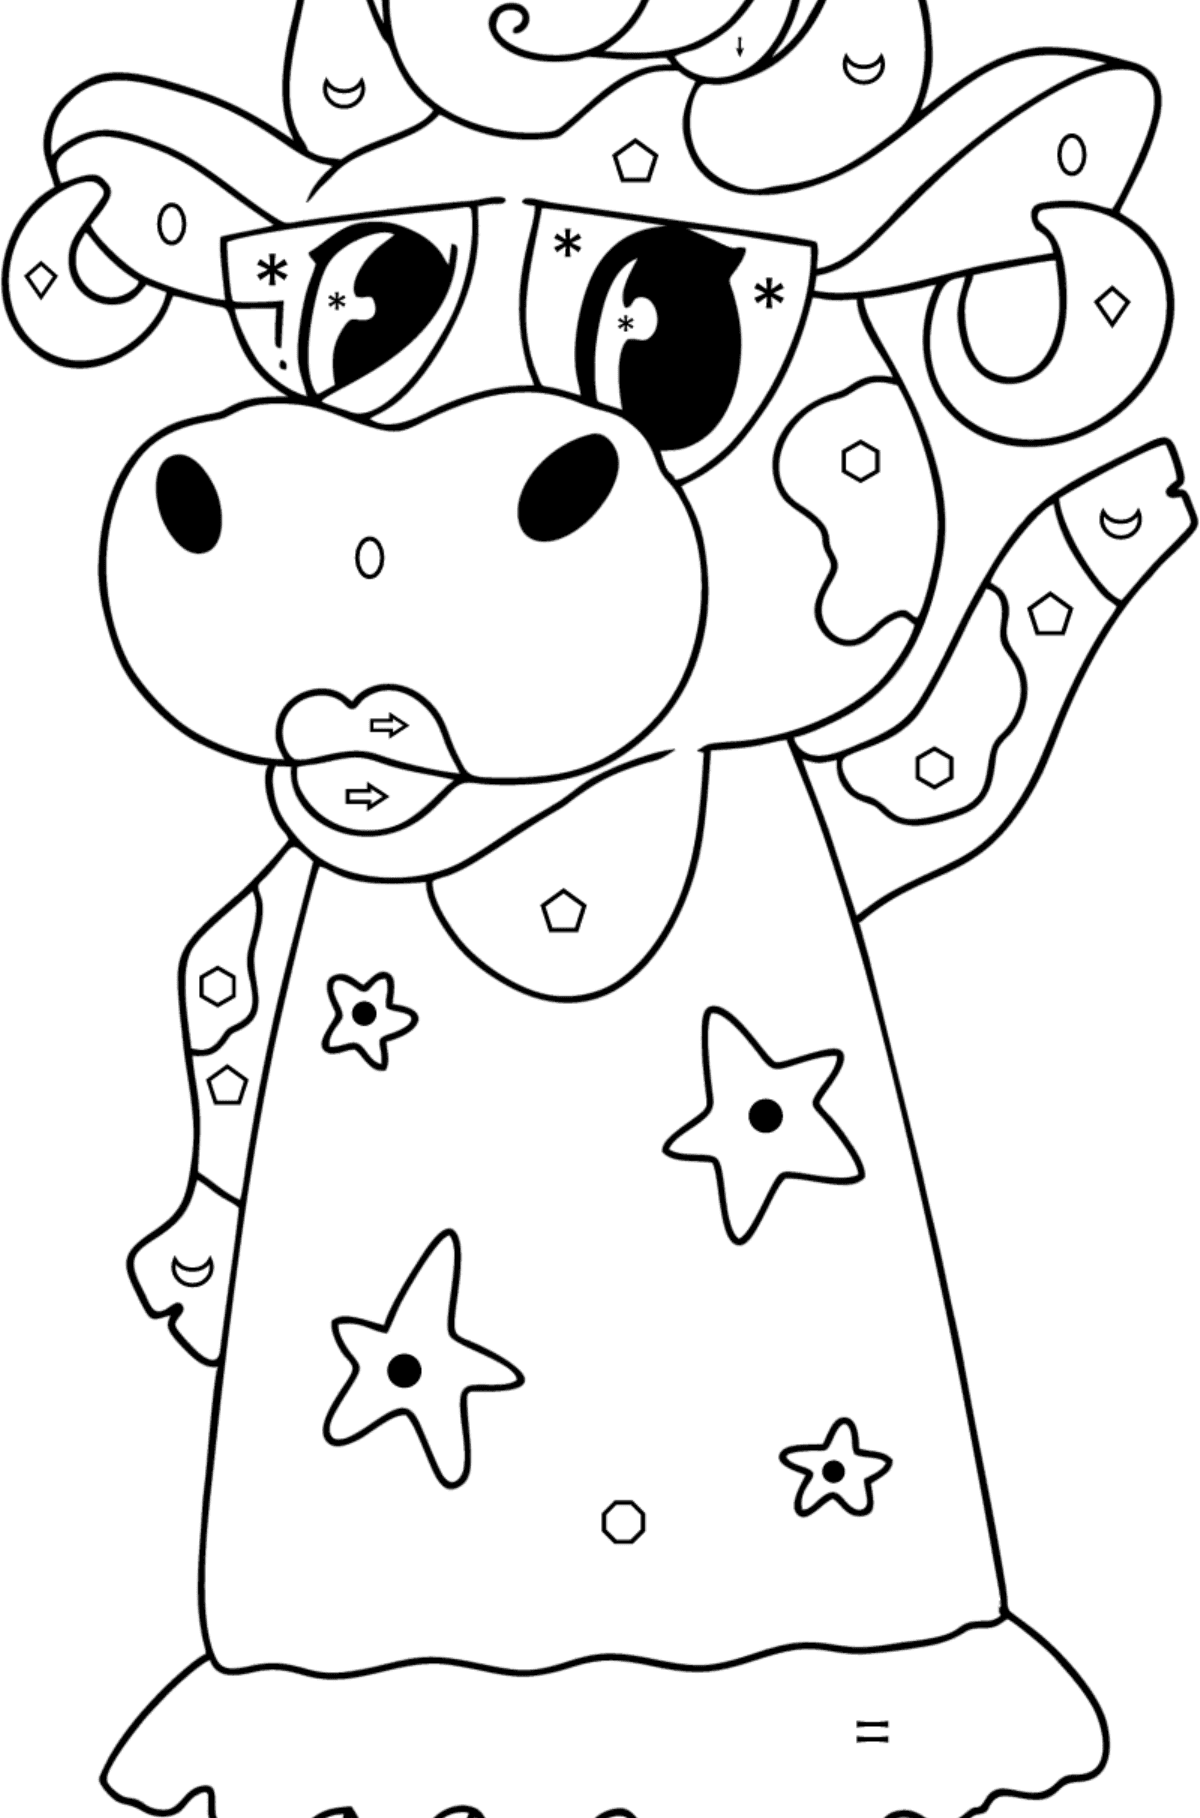 Cartoon cow standing up coloring page - Coloring by Symbols and Geometric Shapes for Kids